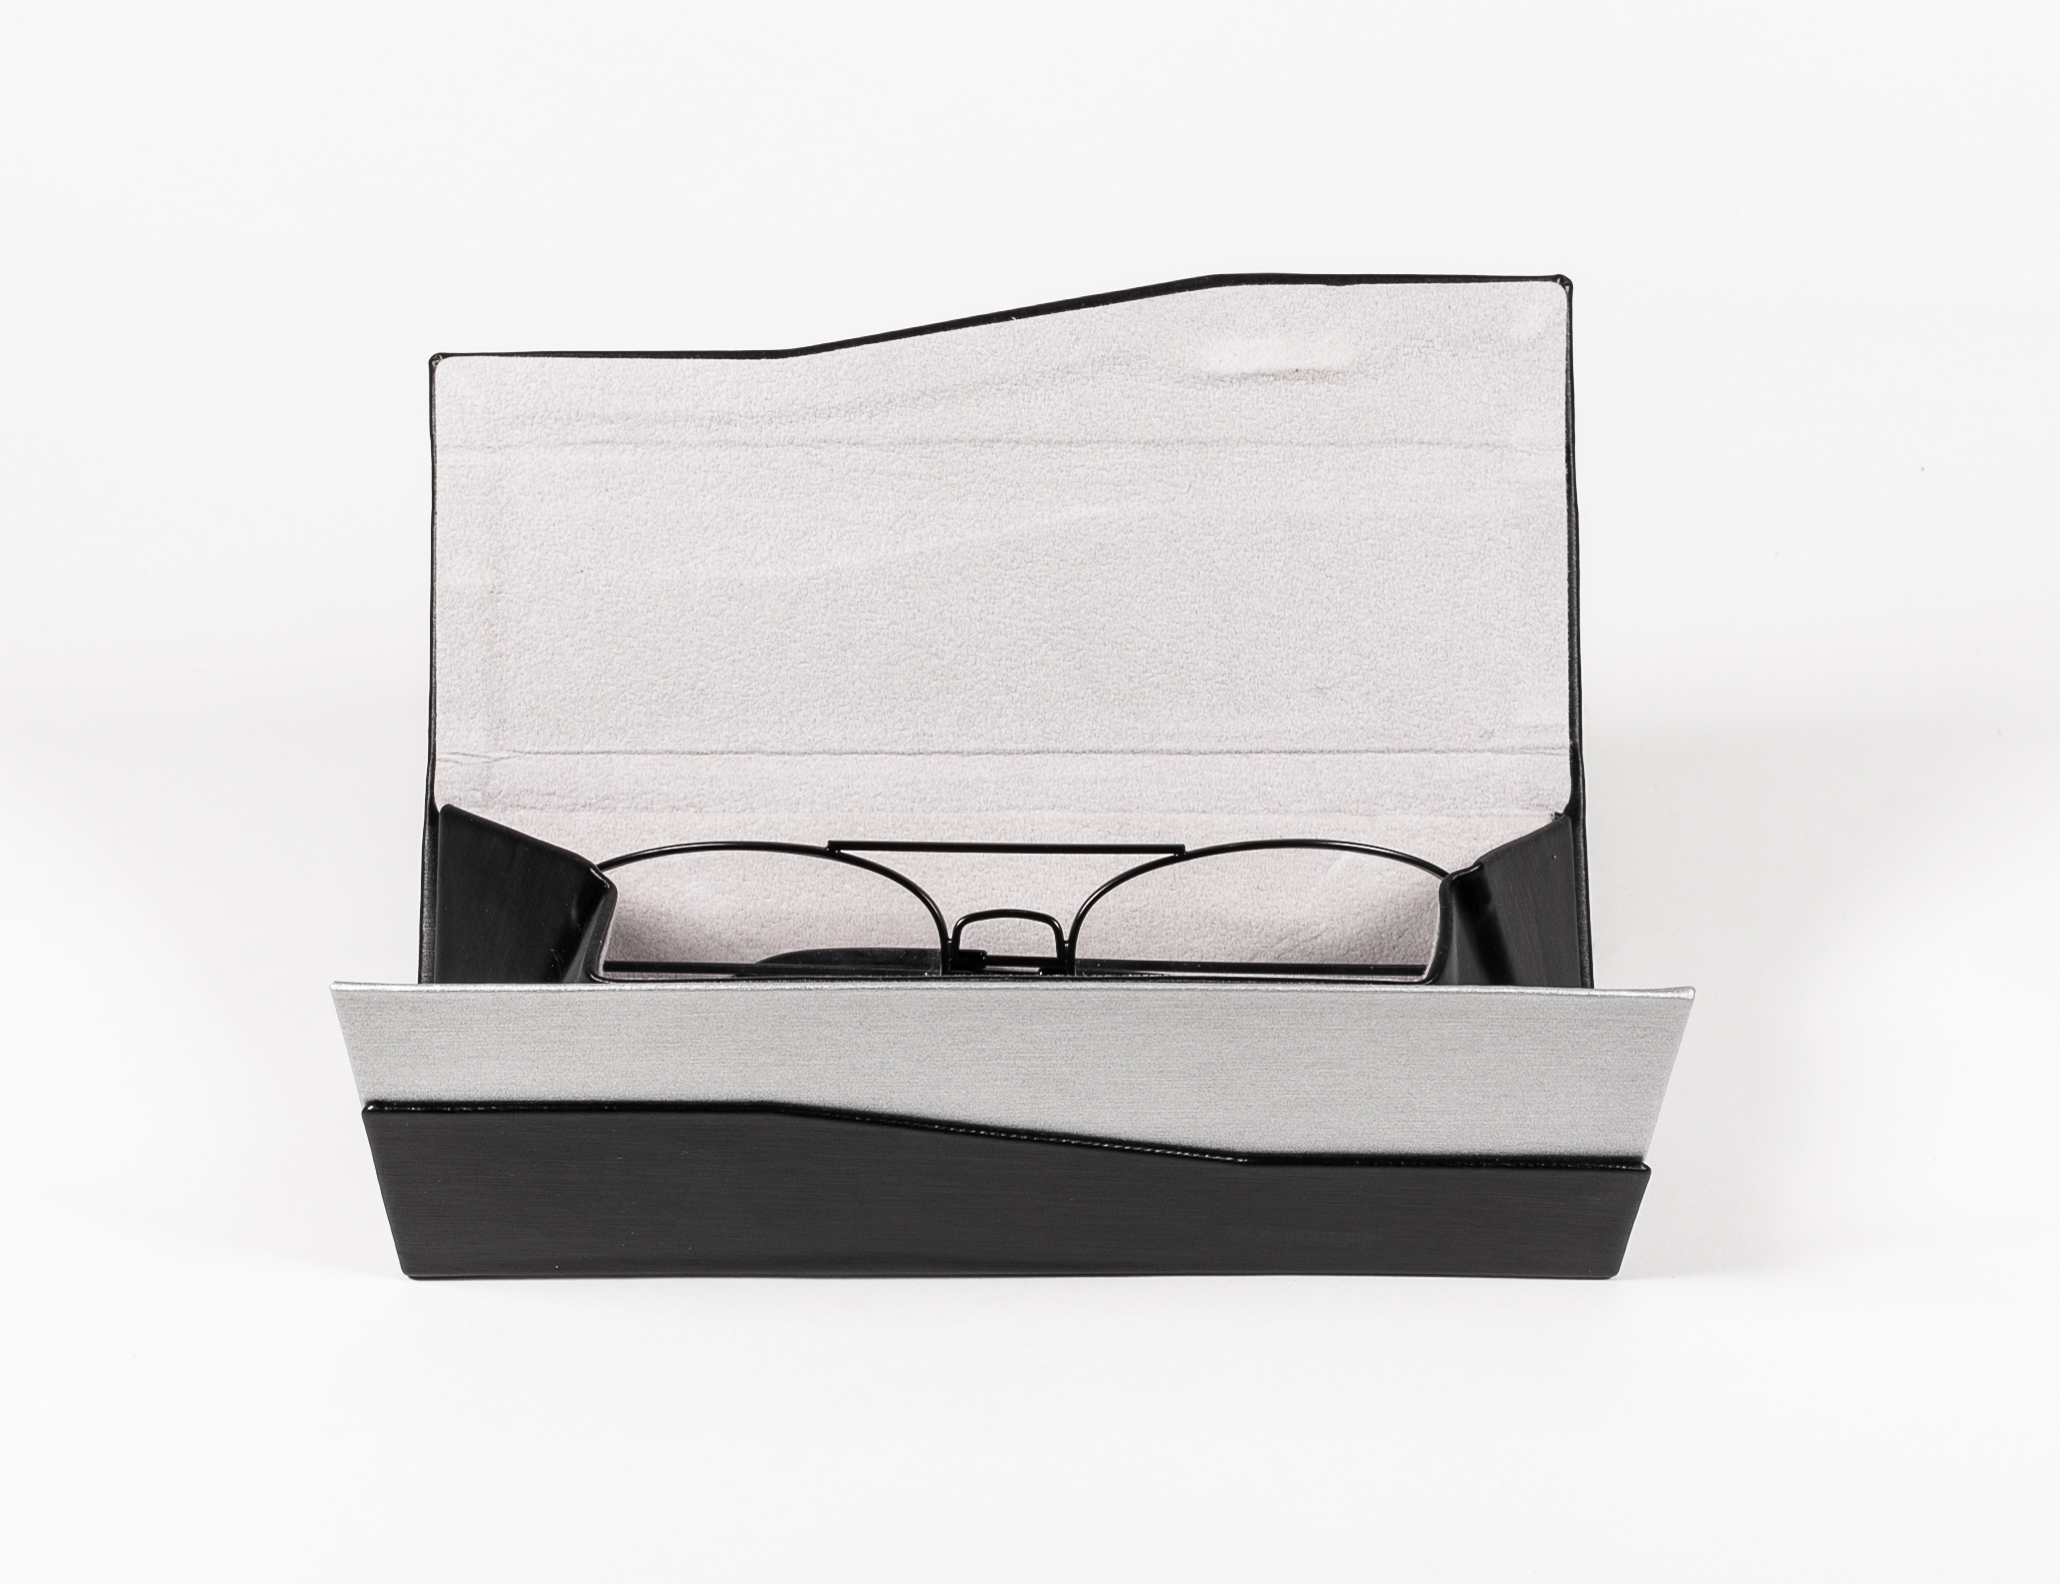 2021 Sunglasses, Black, Detachable, Hand-made Glasses Case with Triangular Appearance